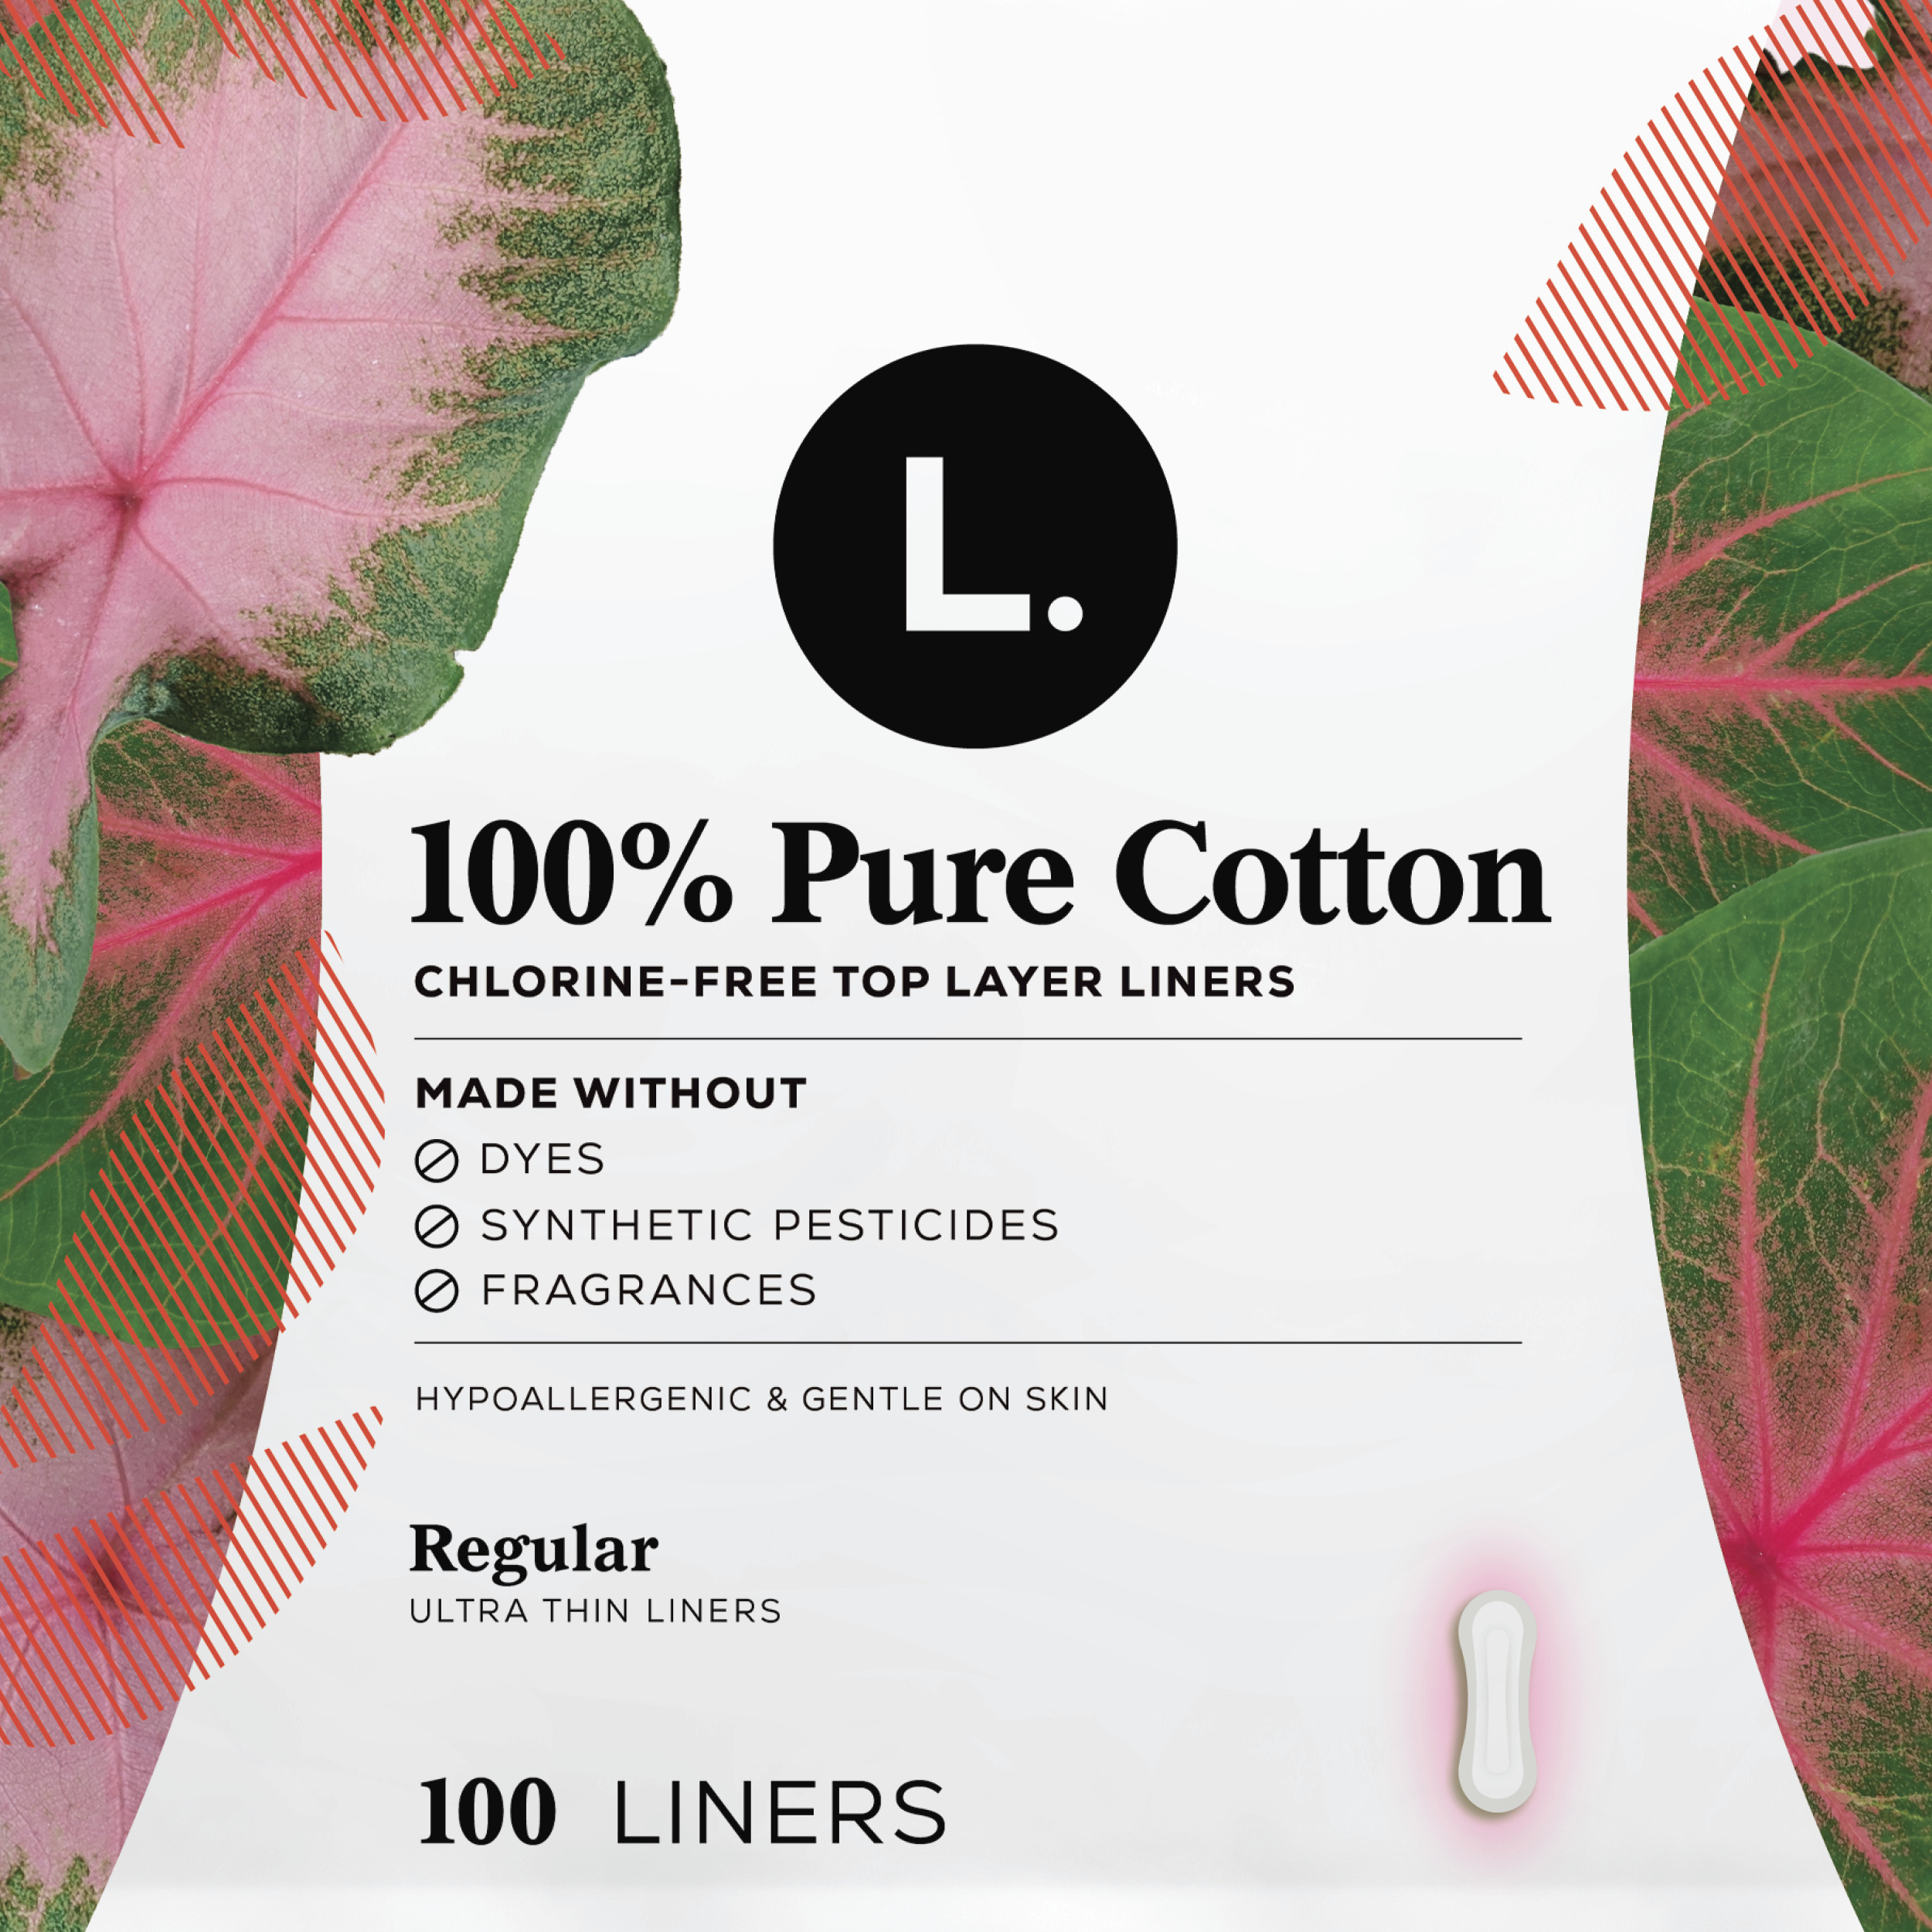 L. Ultra Thin Liners for Women, Regular, 100% Pure Cotton Top Layer 100 Ct - image 5 of 10